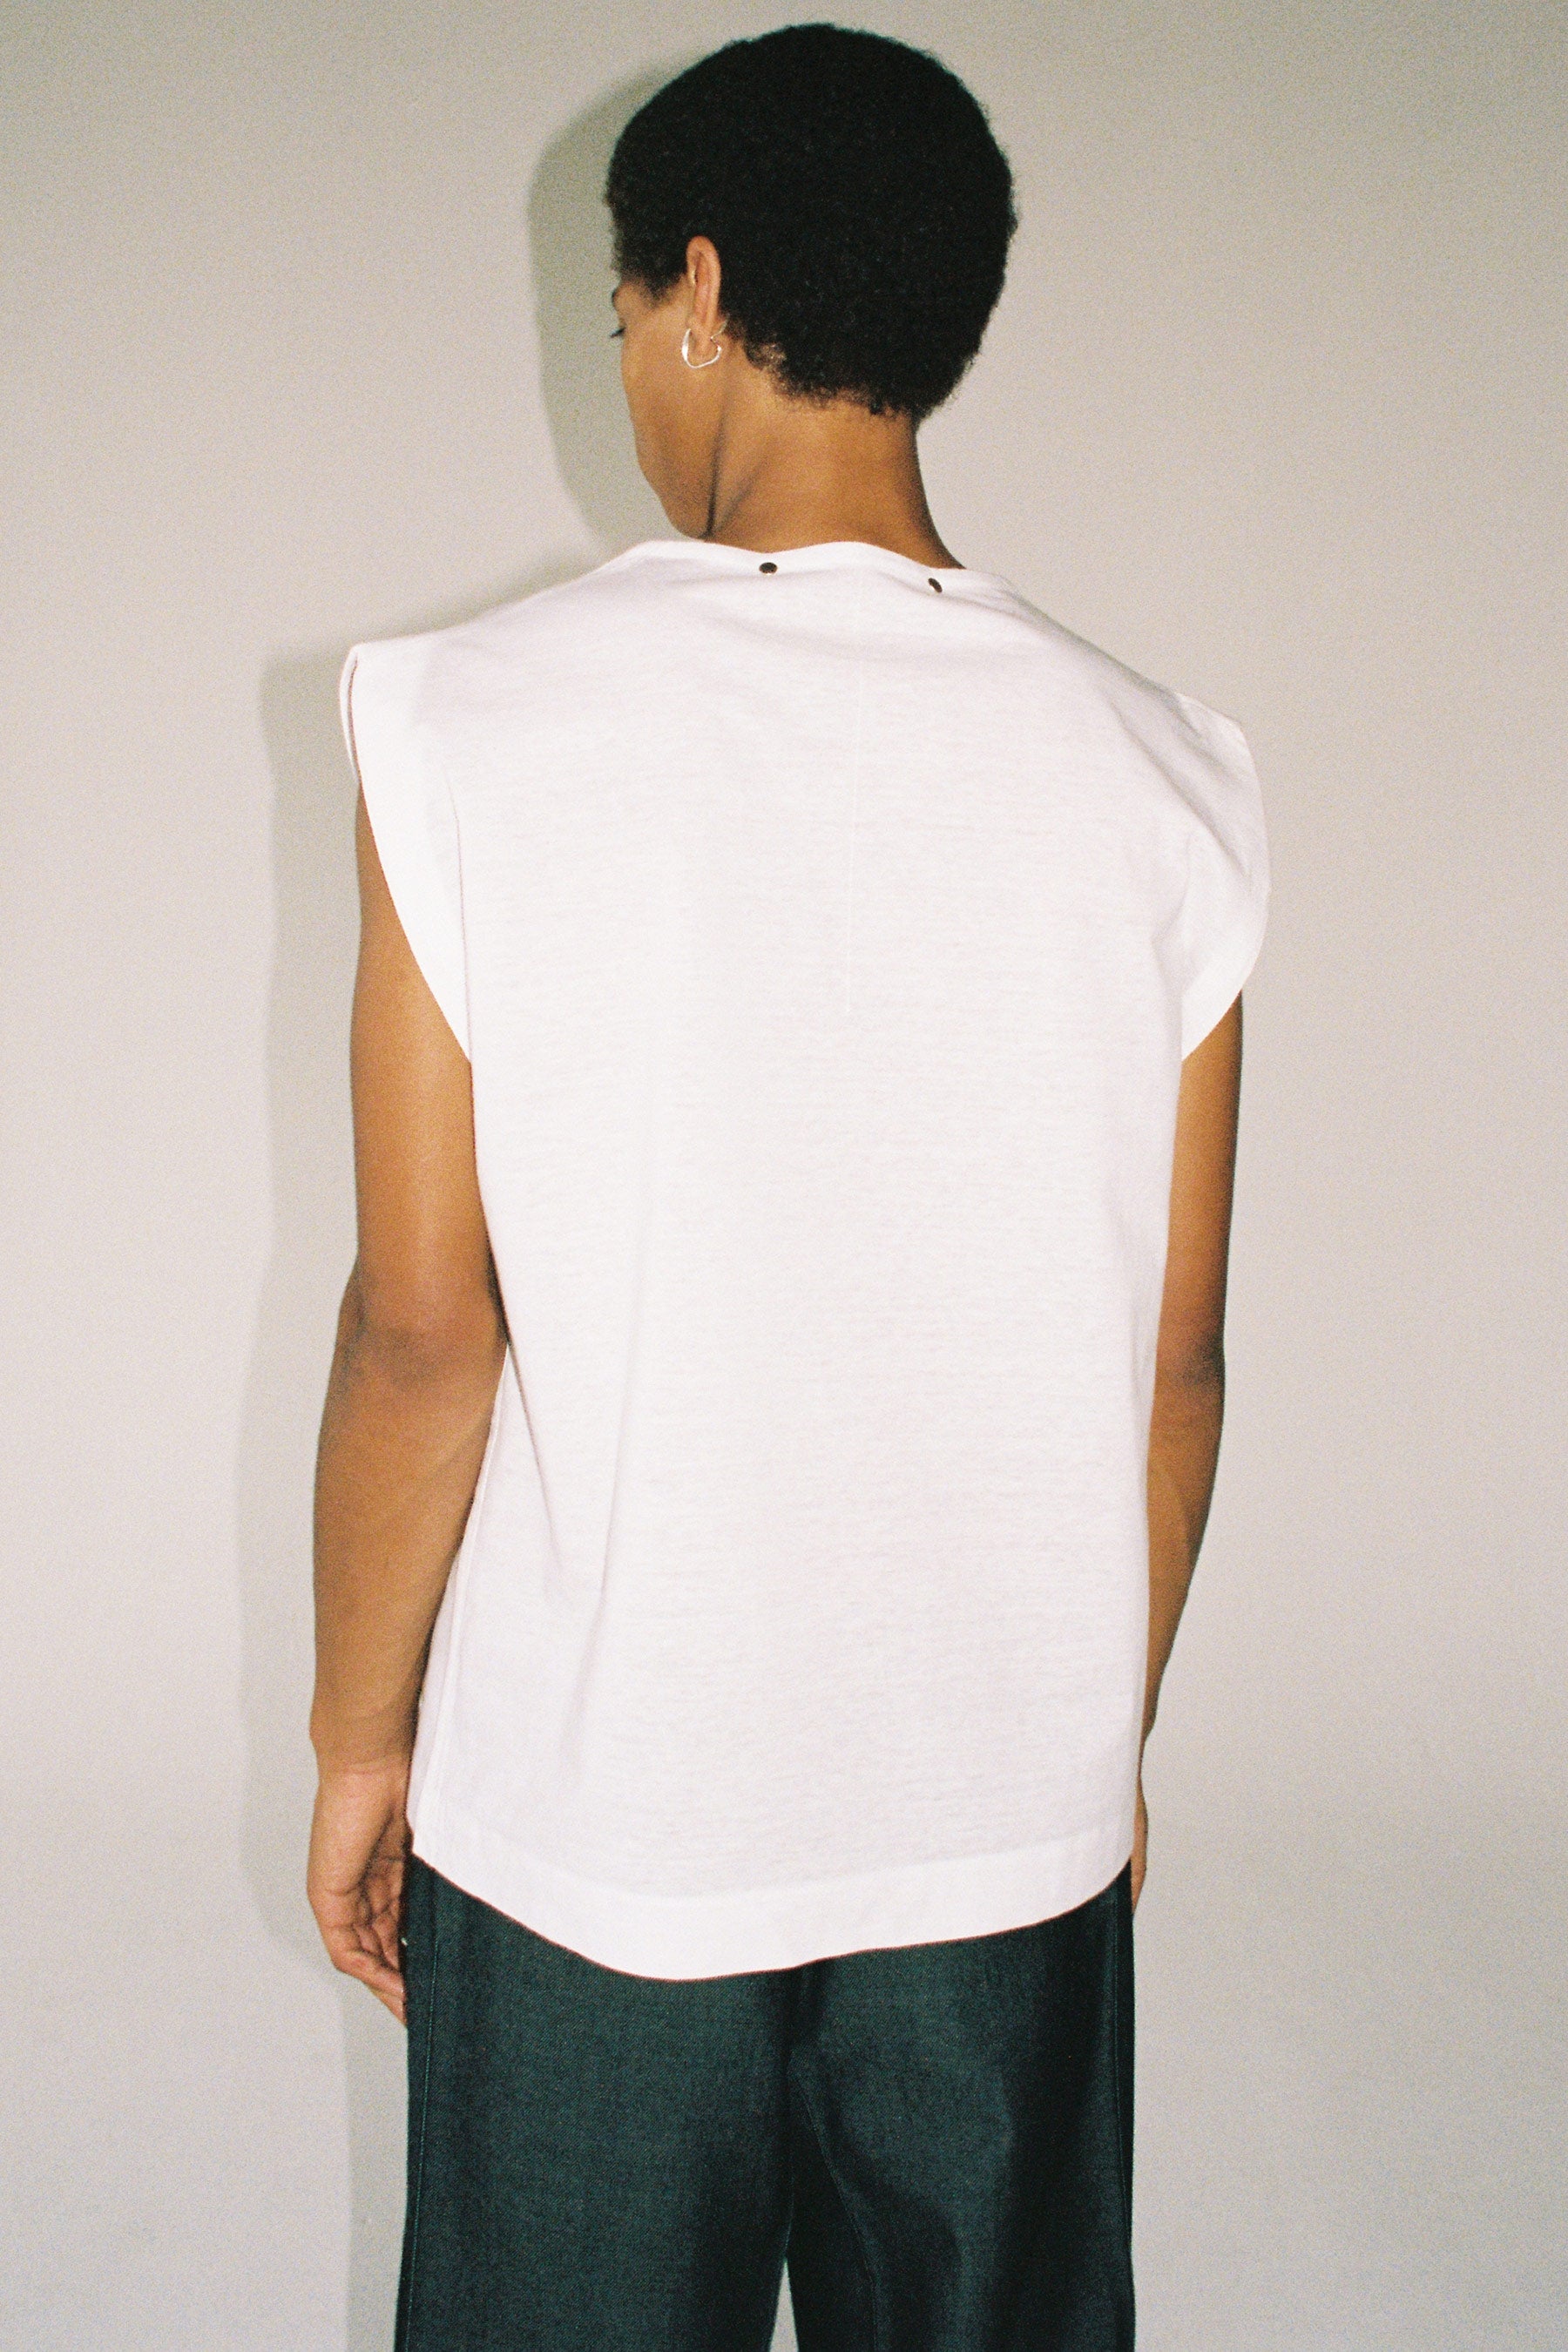 White Cotton Polyester Square Tank Tops with Adjustable Neckline